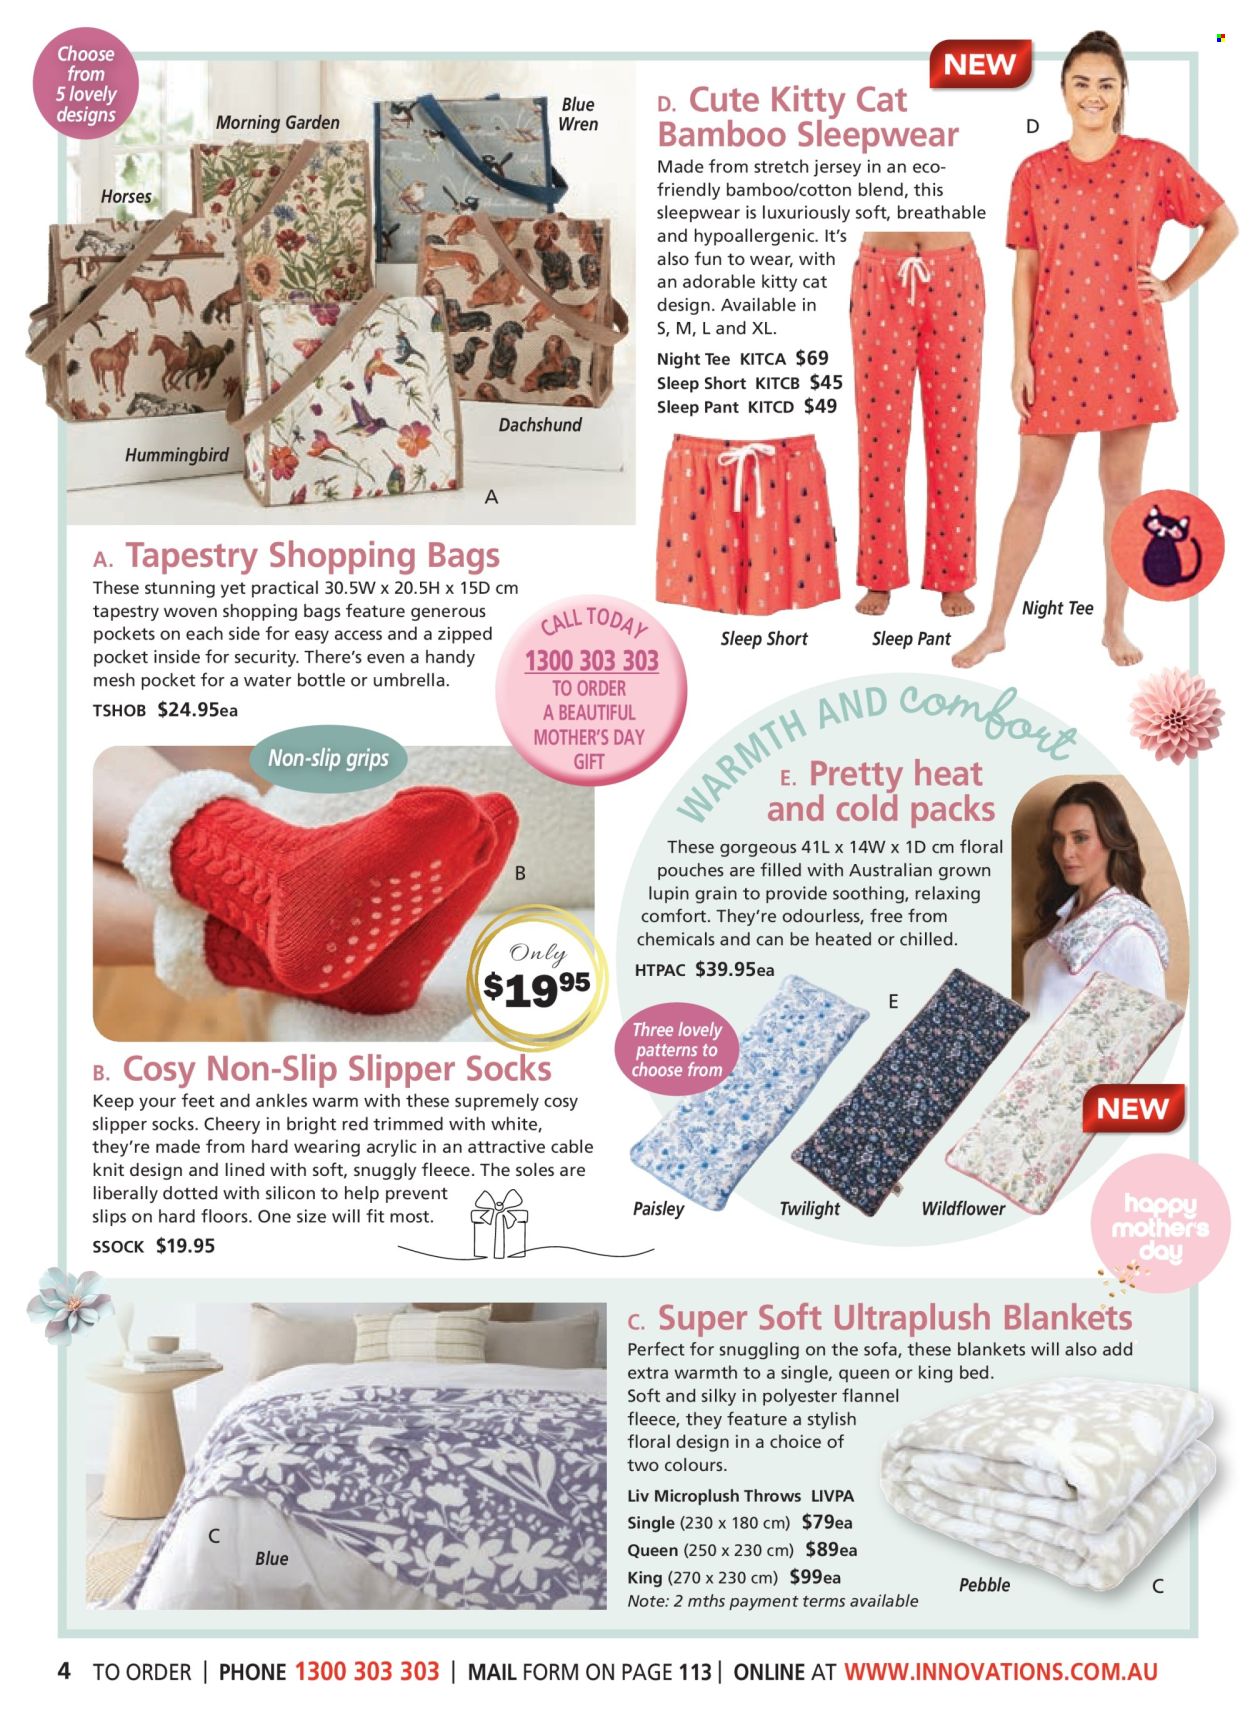 thumbnail - Innovations Catalogue - Sales products - slippers, drink bottle, bag, blanket, tapestry, t-shirt, socks, umbrella, sleepwear, pajamas. Page 4.